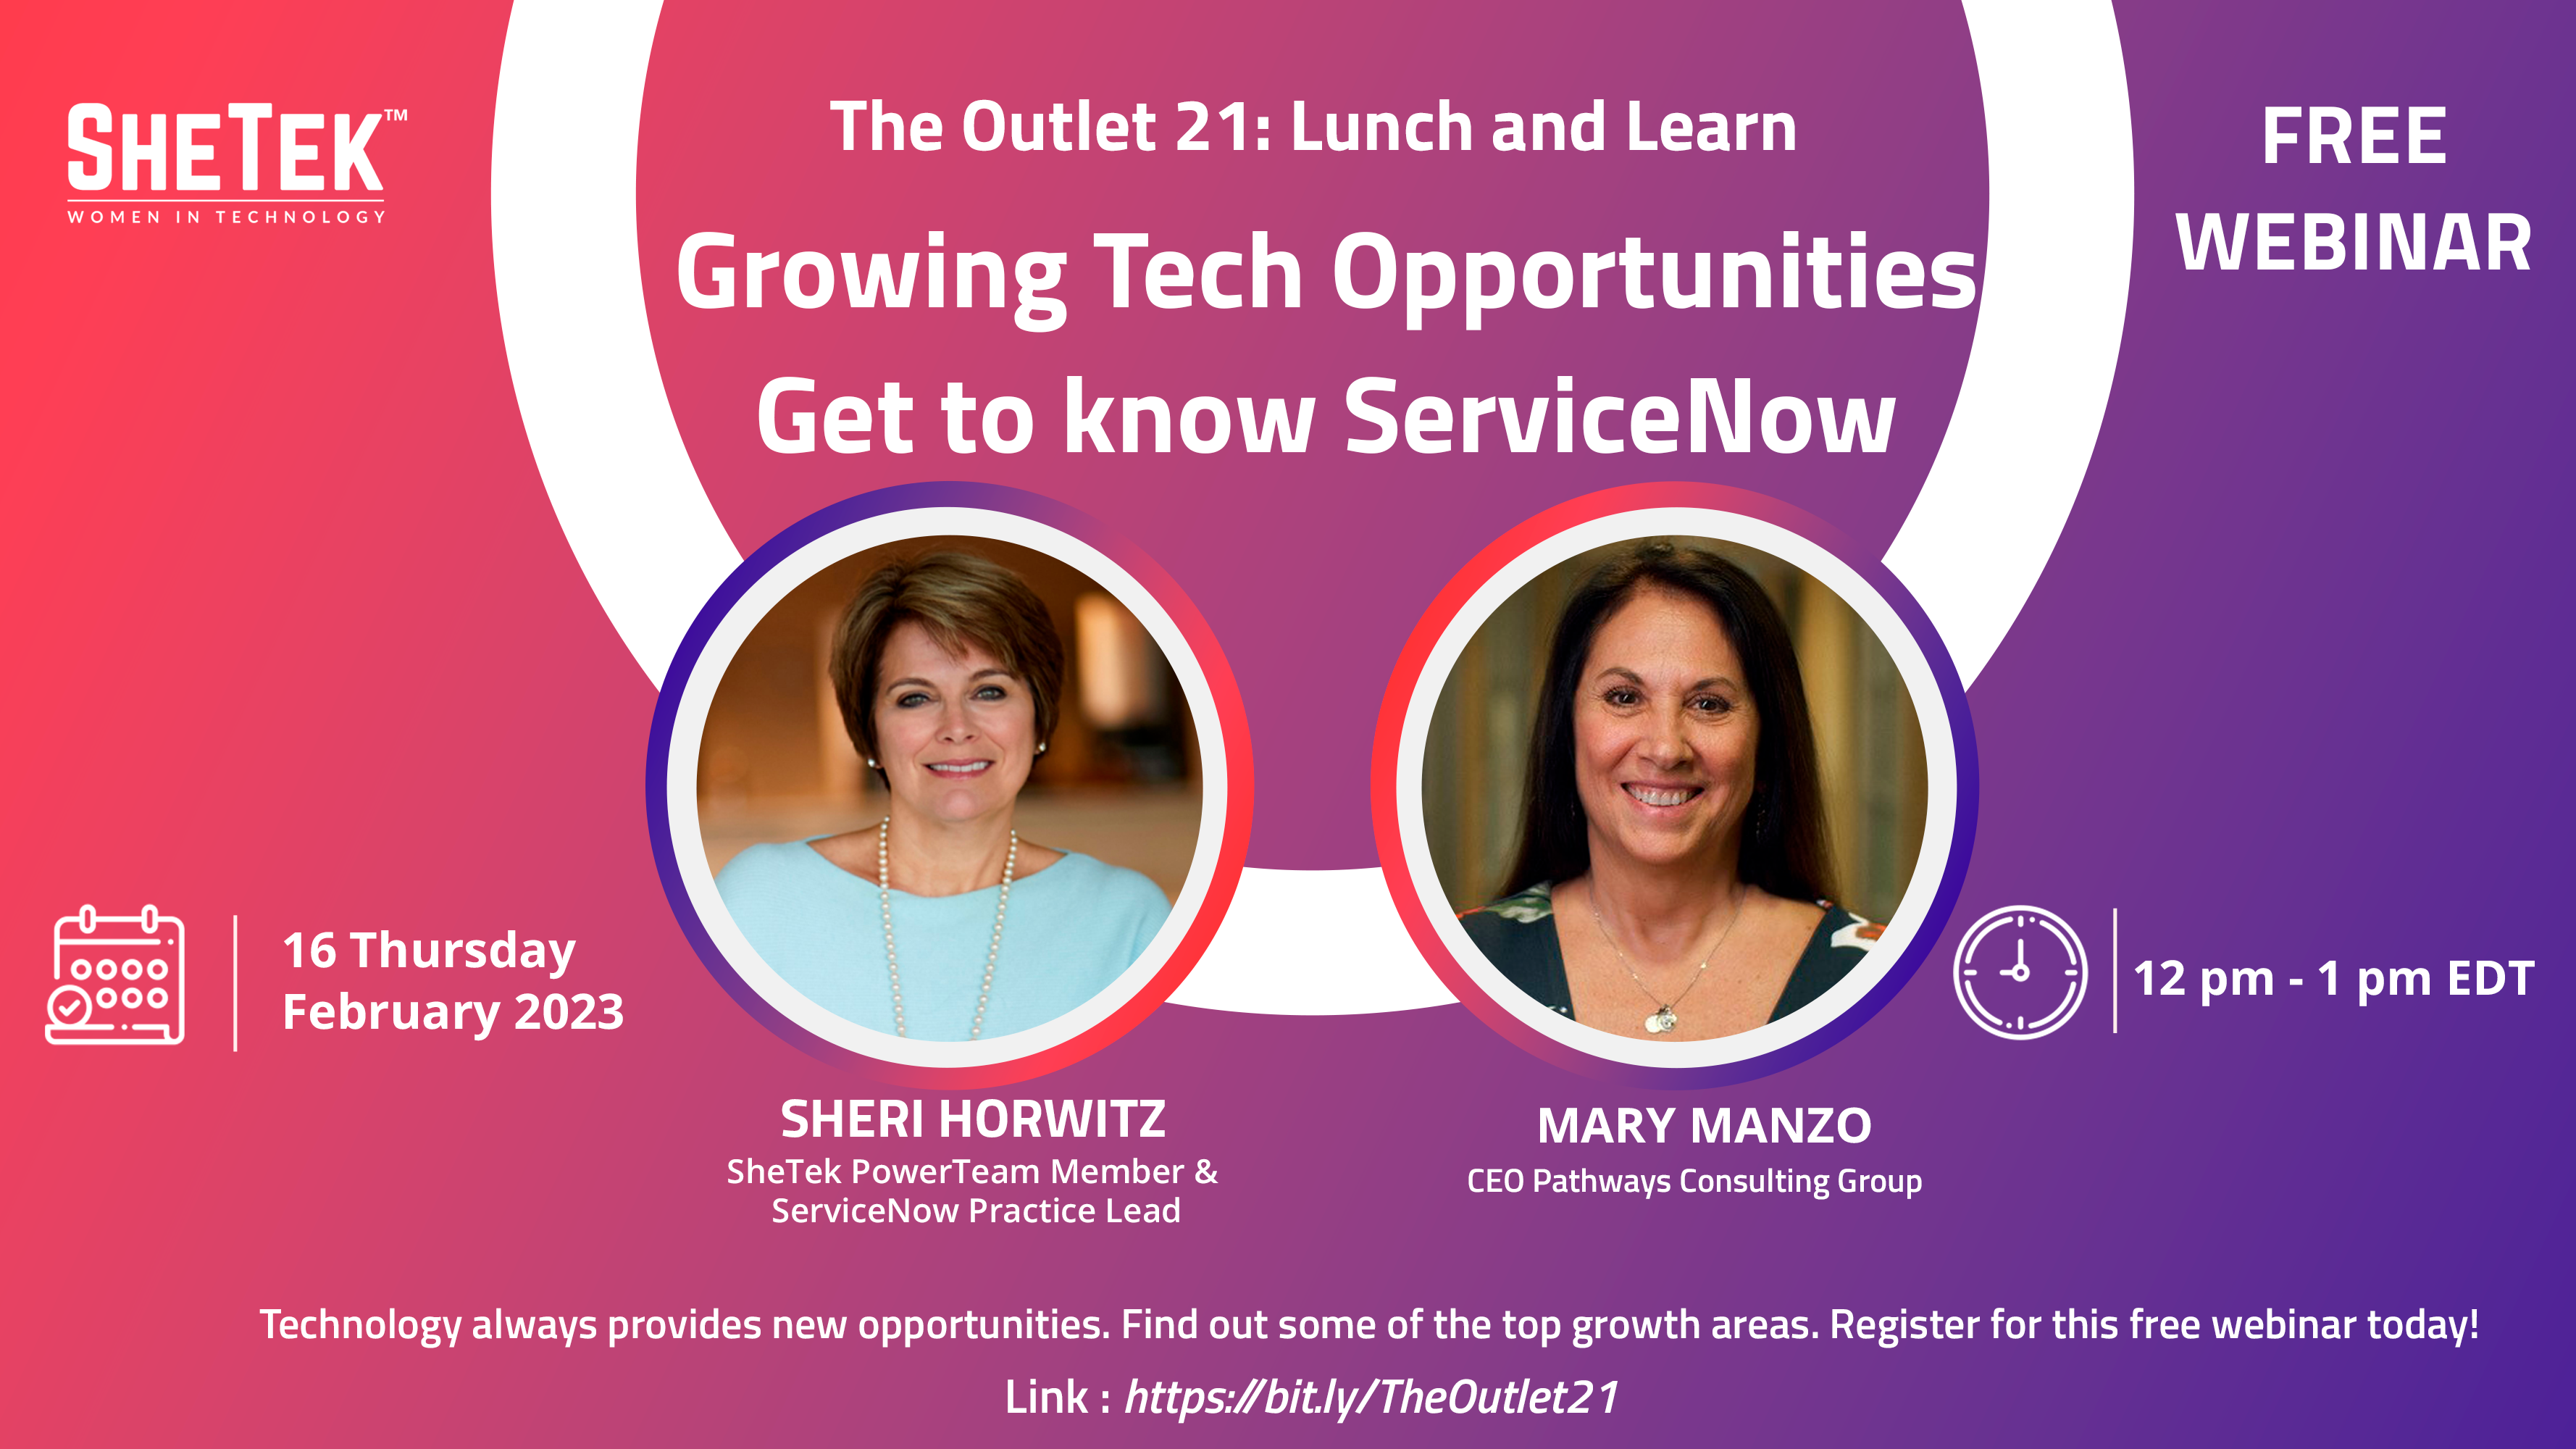 The Outlet 21: Get to know ServiceNow and Tech Opportunities